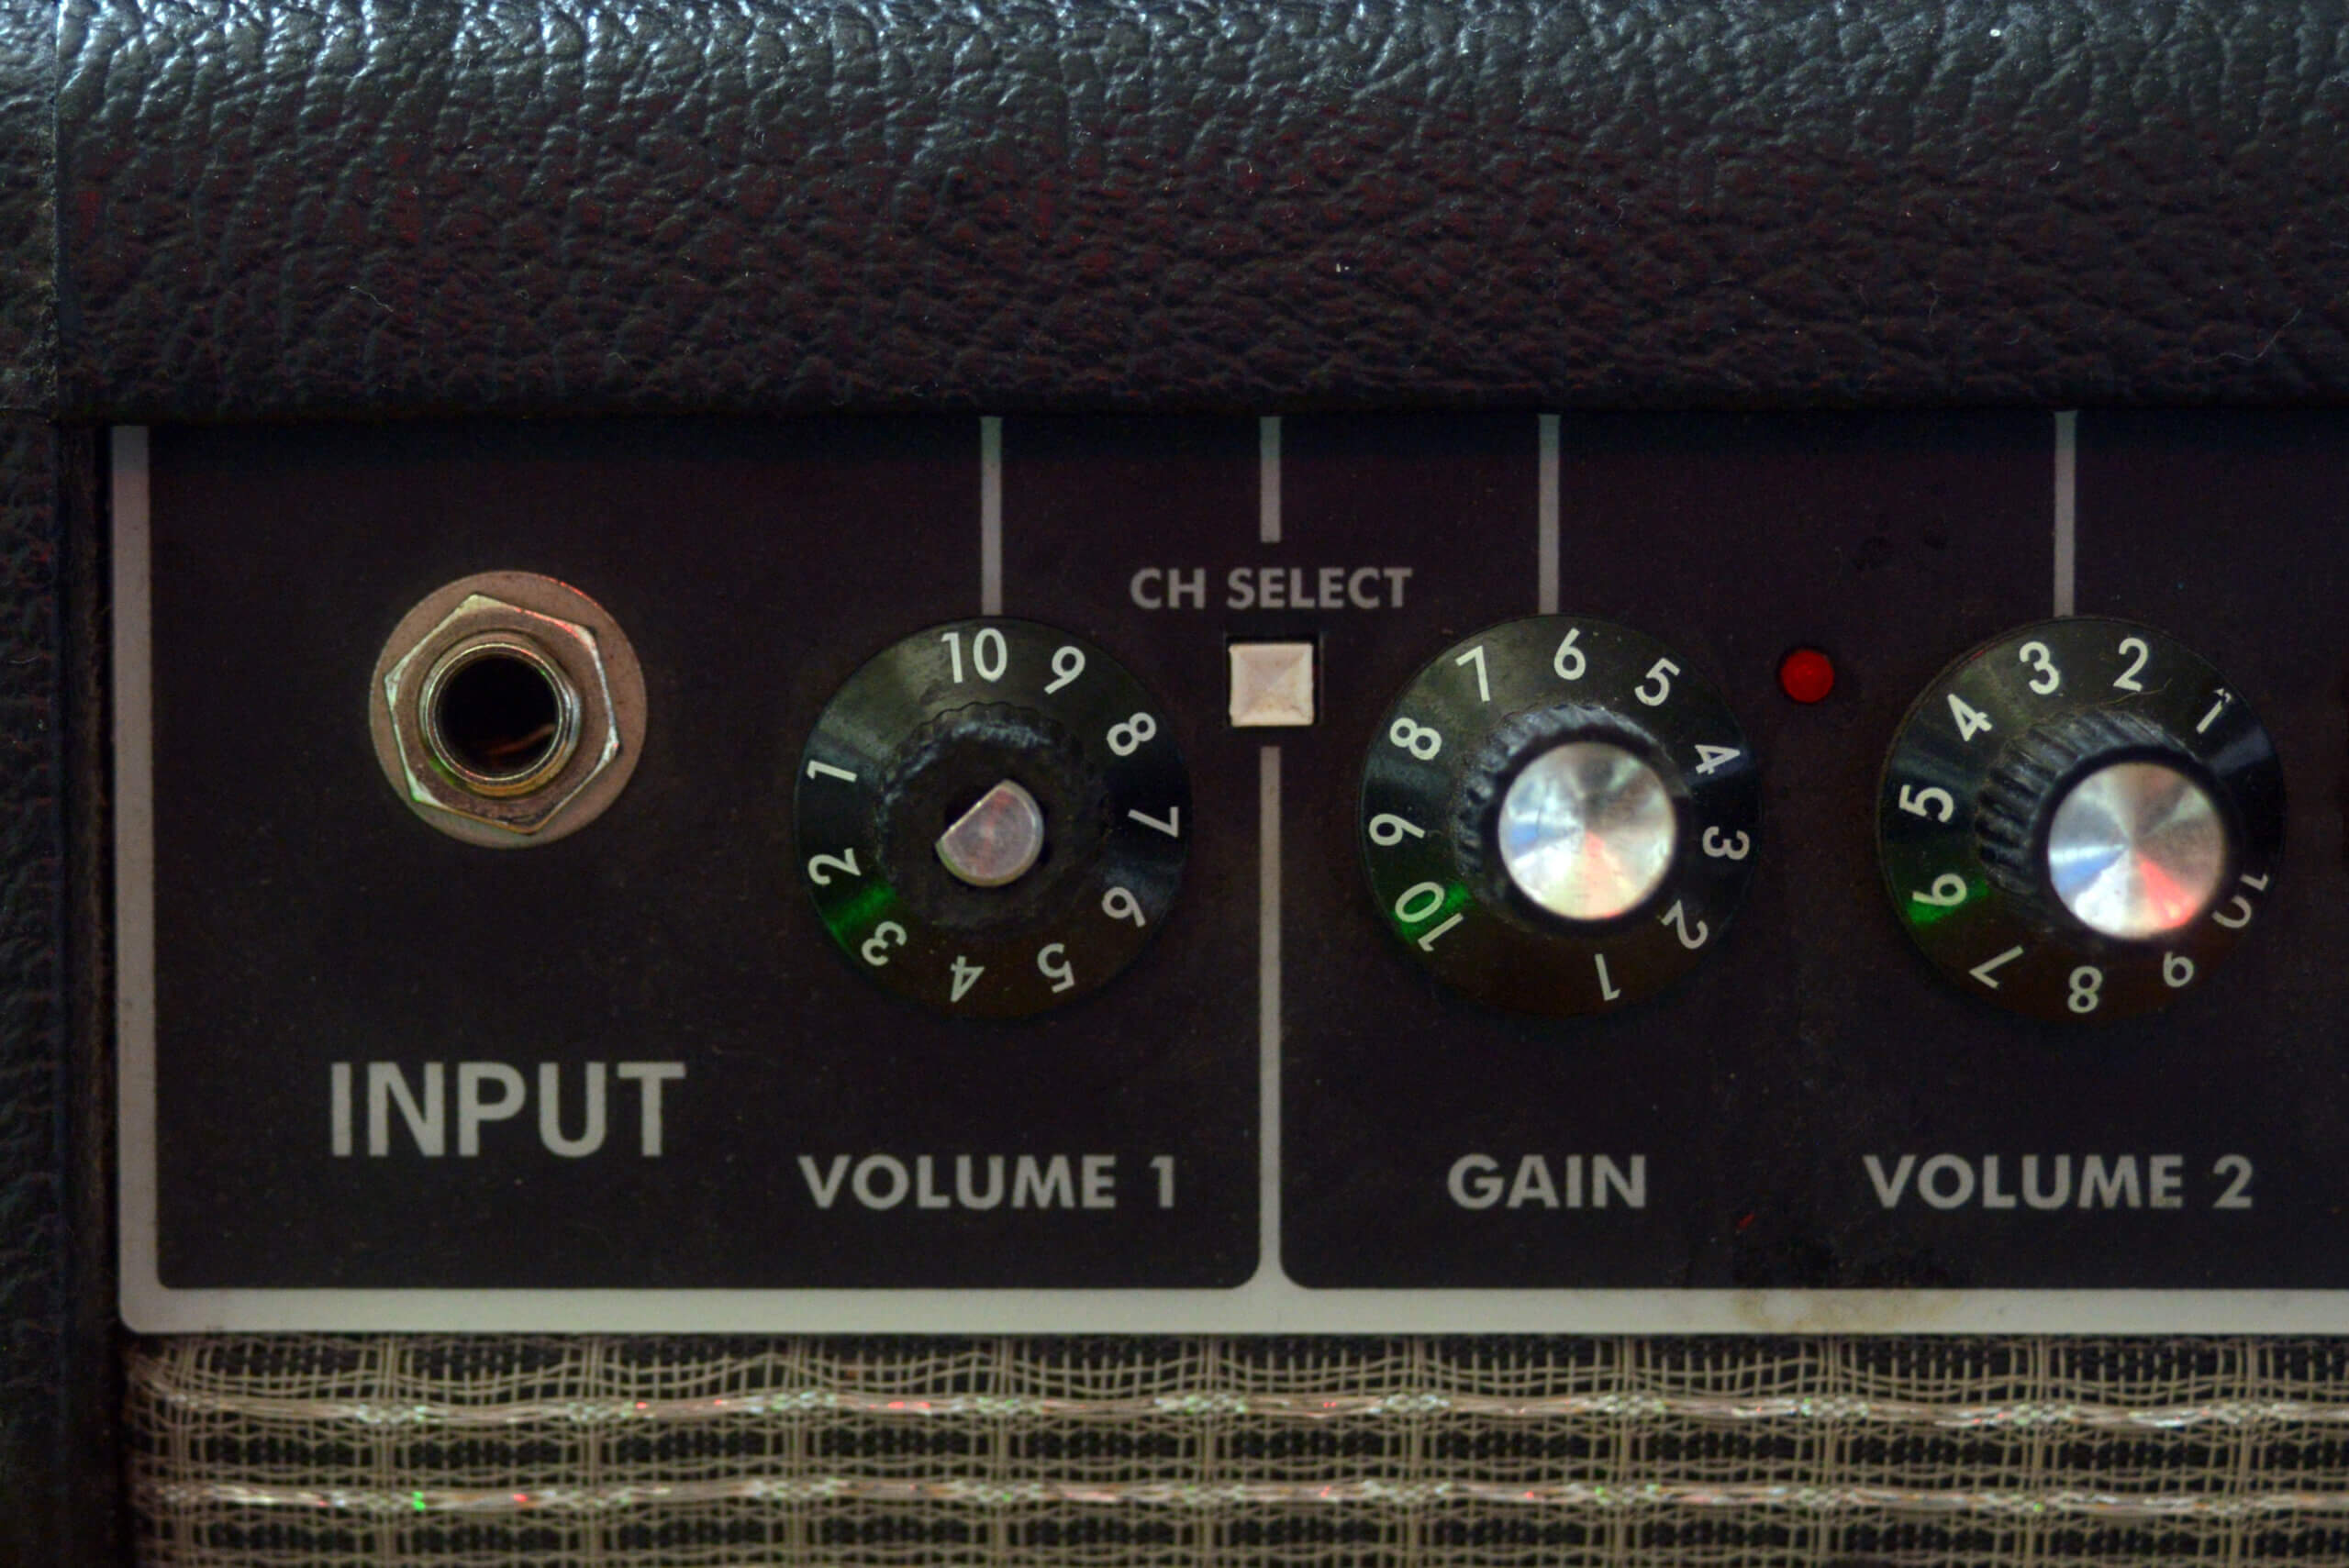 Control panel with volume dials for amplifier